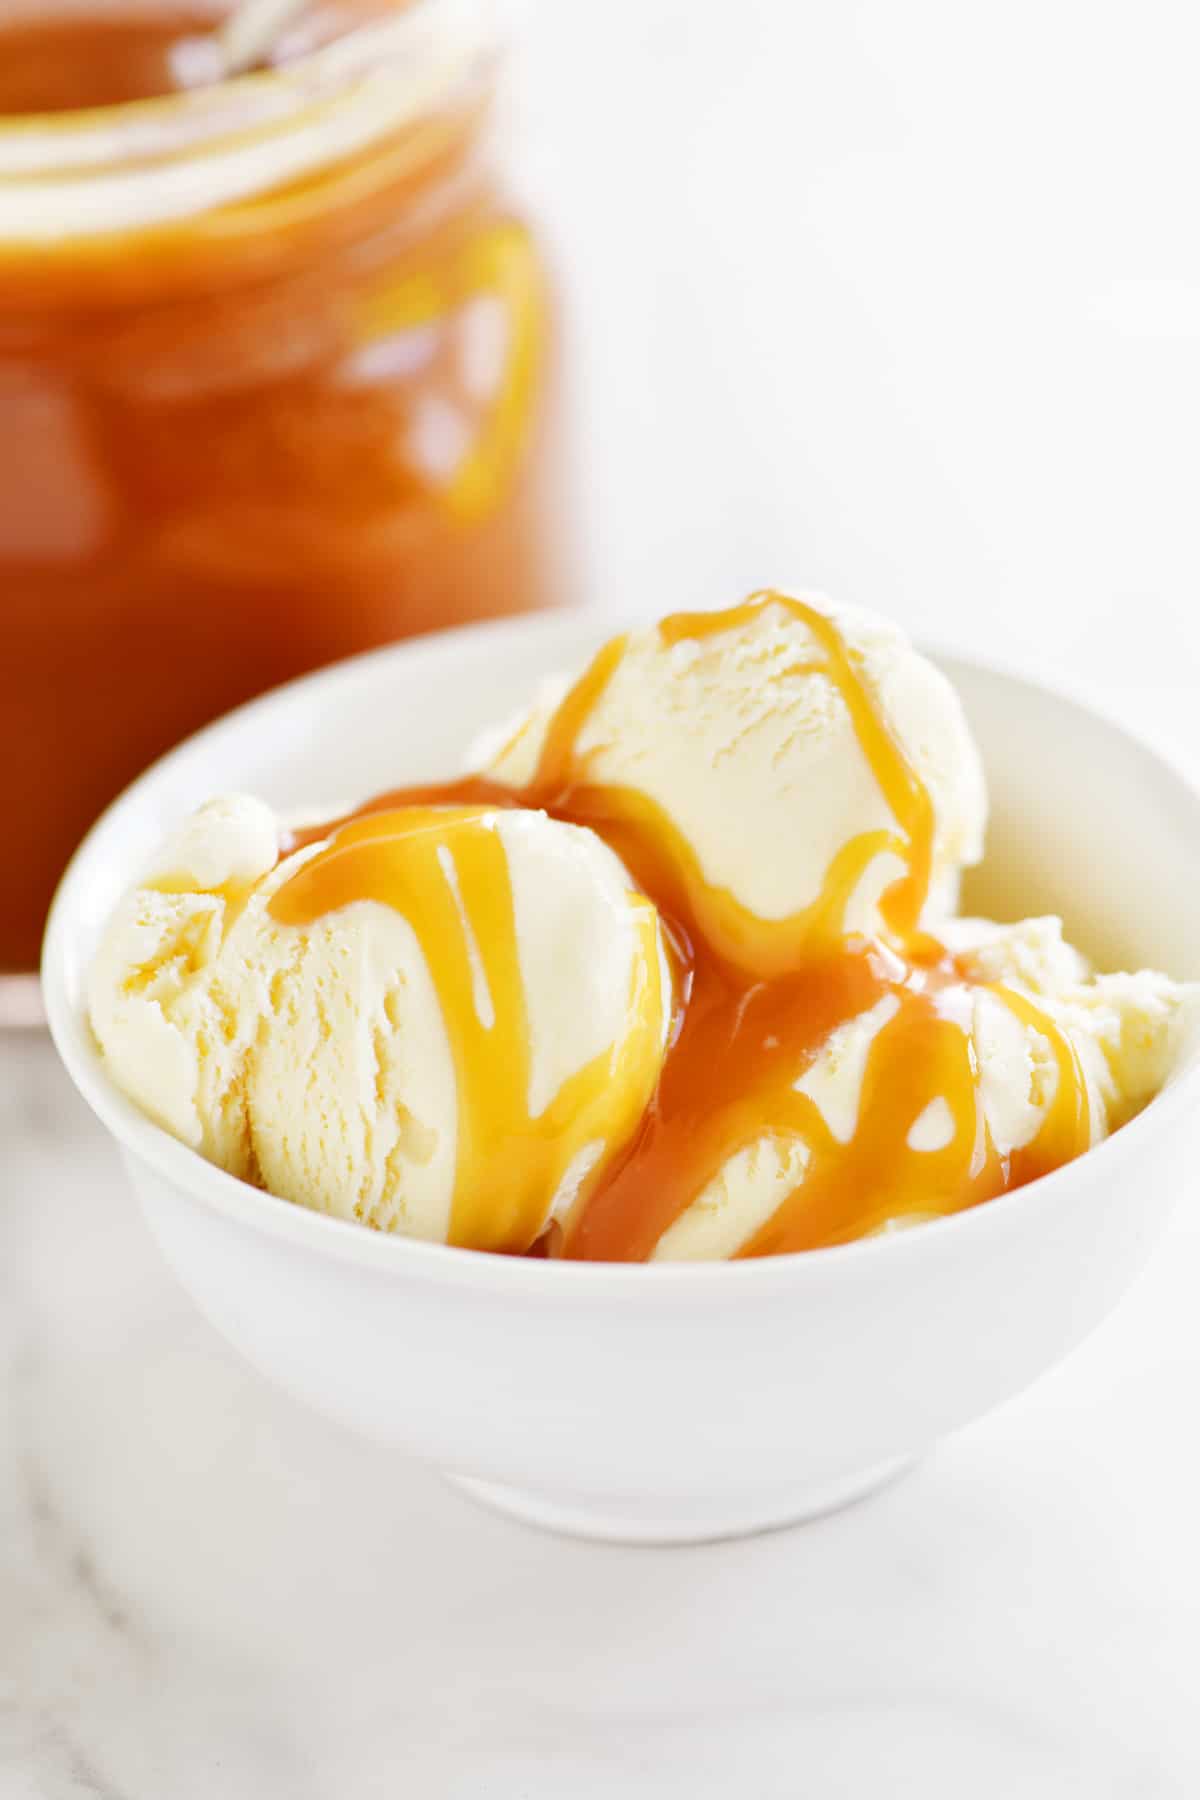 vanilla ice cream with caramel on top in a bowl